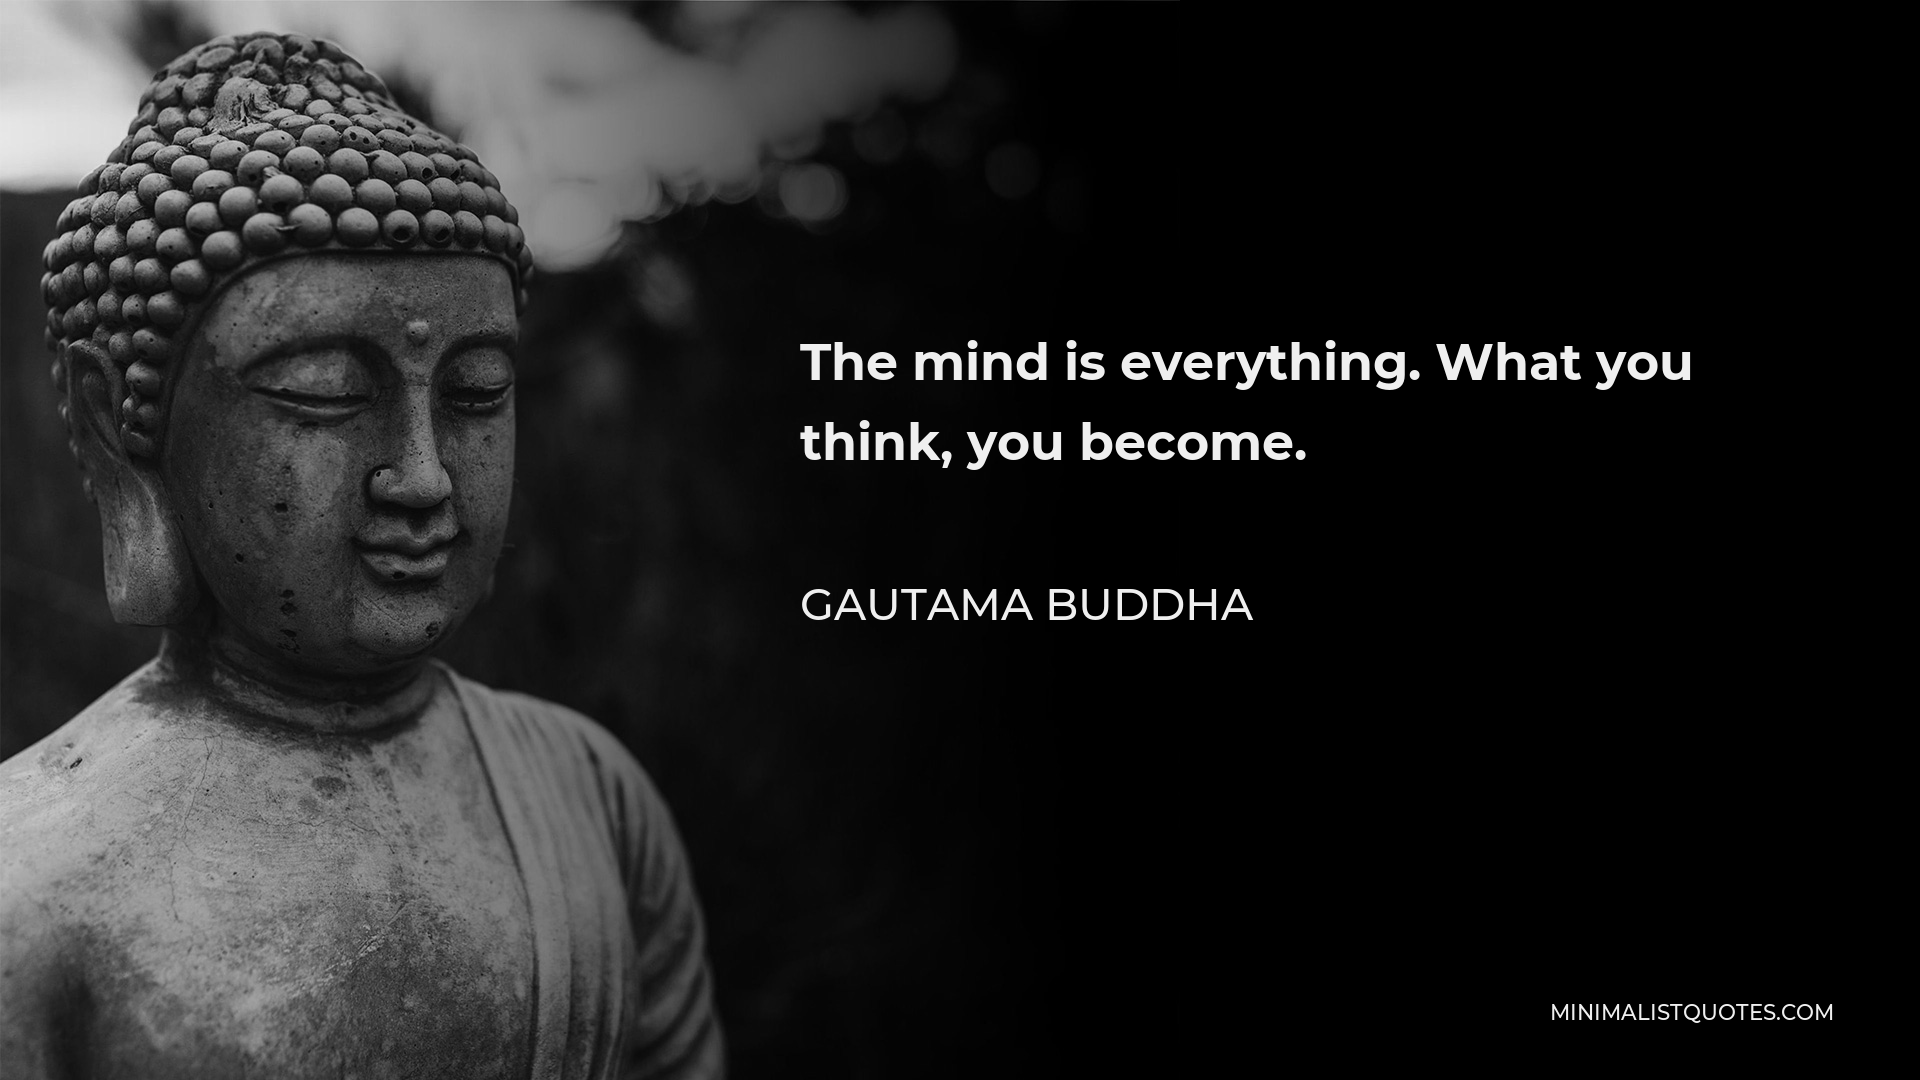 Gautama Buddha Quote - The mind is everything. What you think, you become.